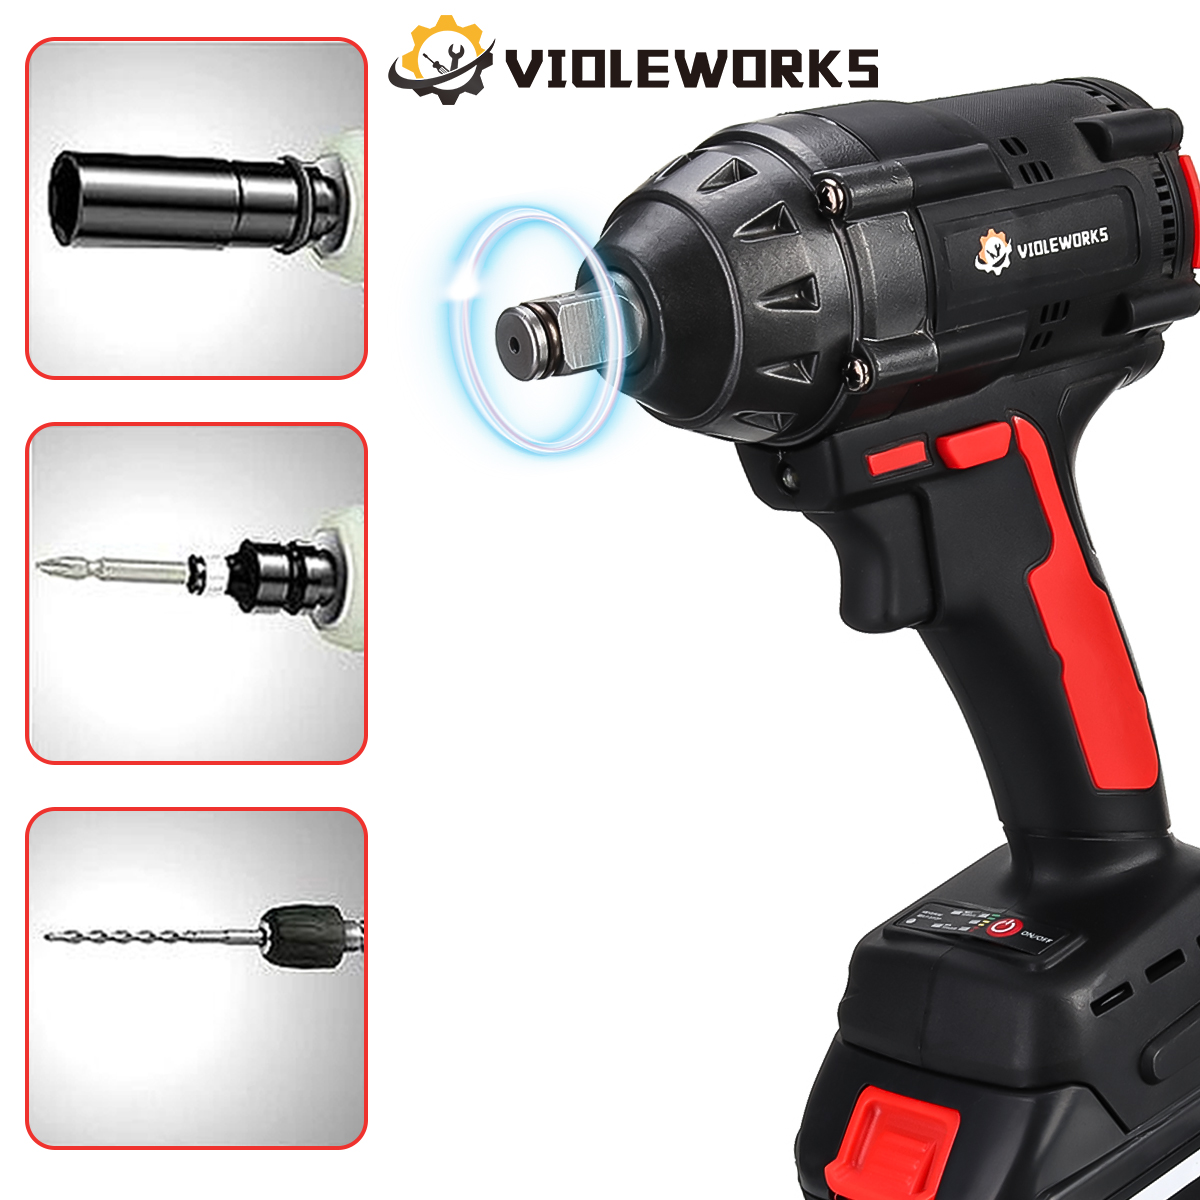 VIOLEWORKS-288VF-12Inch-520NM-Max-Brushless-Impact-Wrench-Li-ion-Electric-Wrench-W-210-Battery-Also--1845741-5